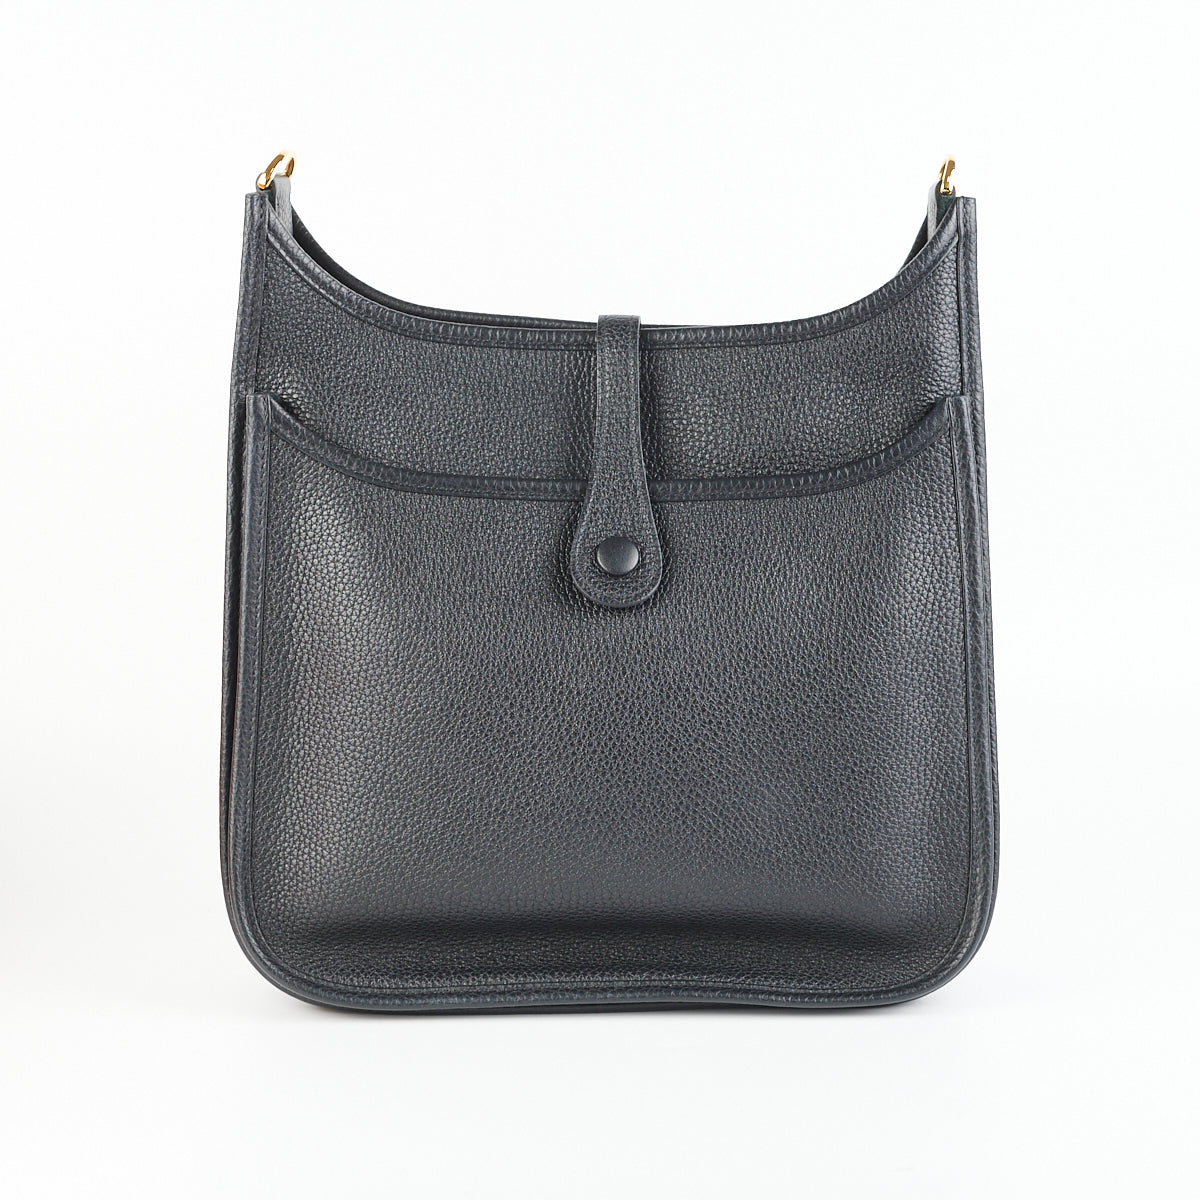 This Hermès Evelyne in the GM size and black leather is chef's